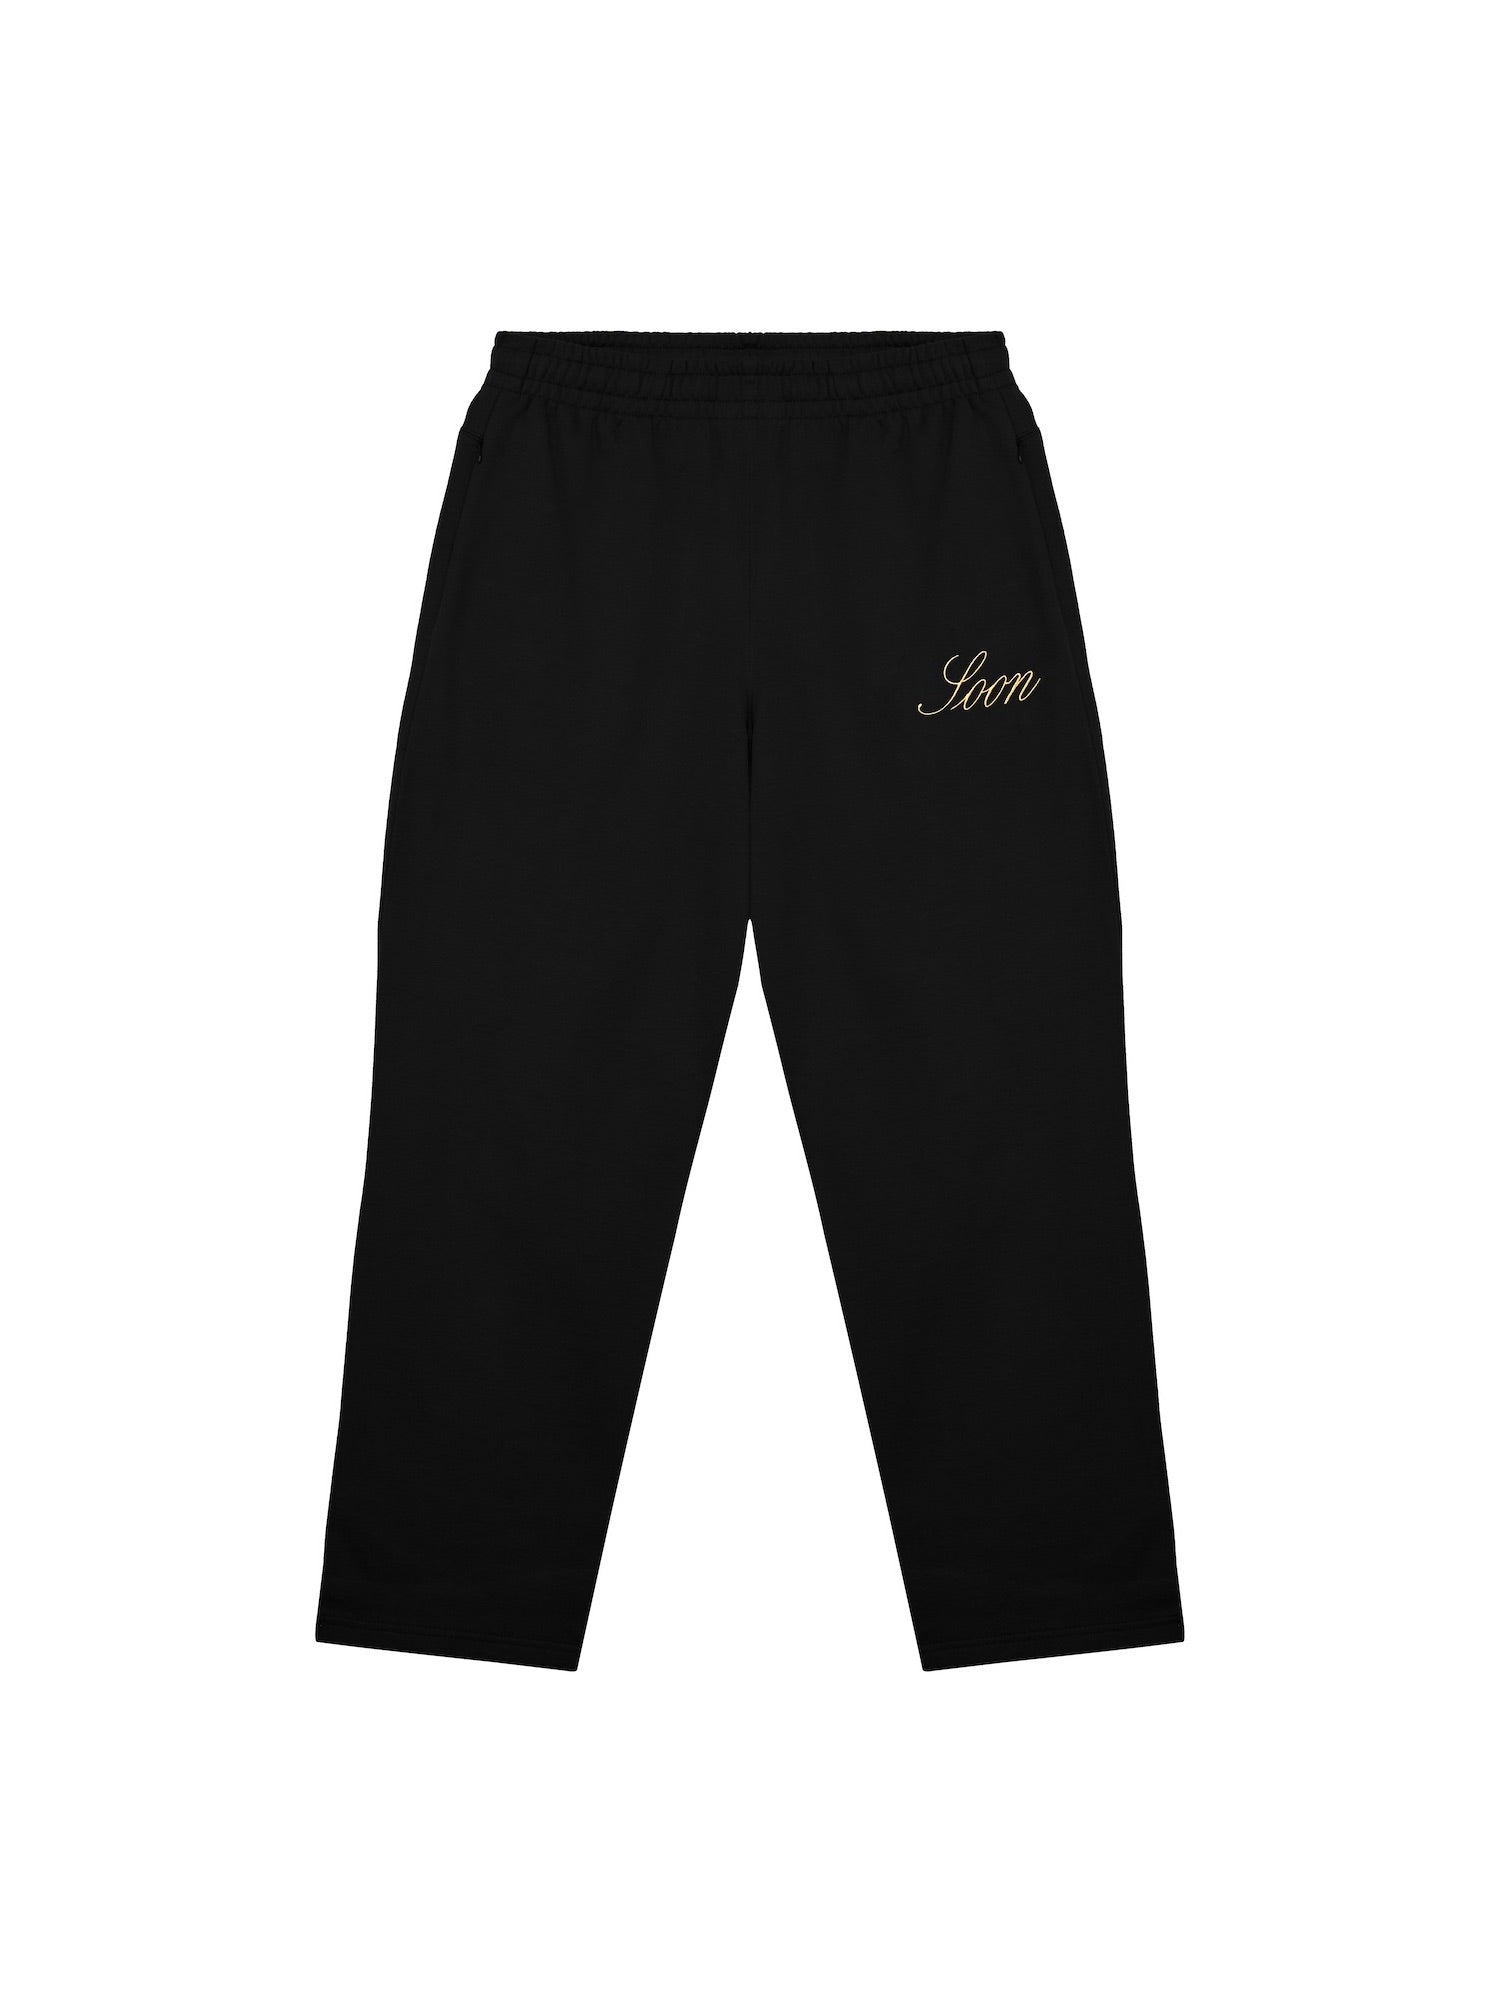 Soon Embroidery Sweatpants